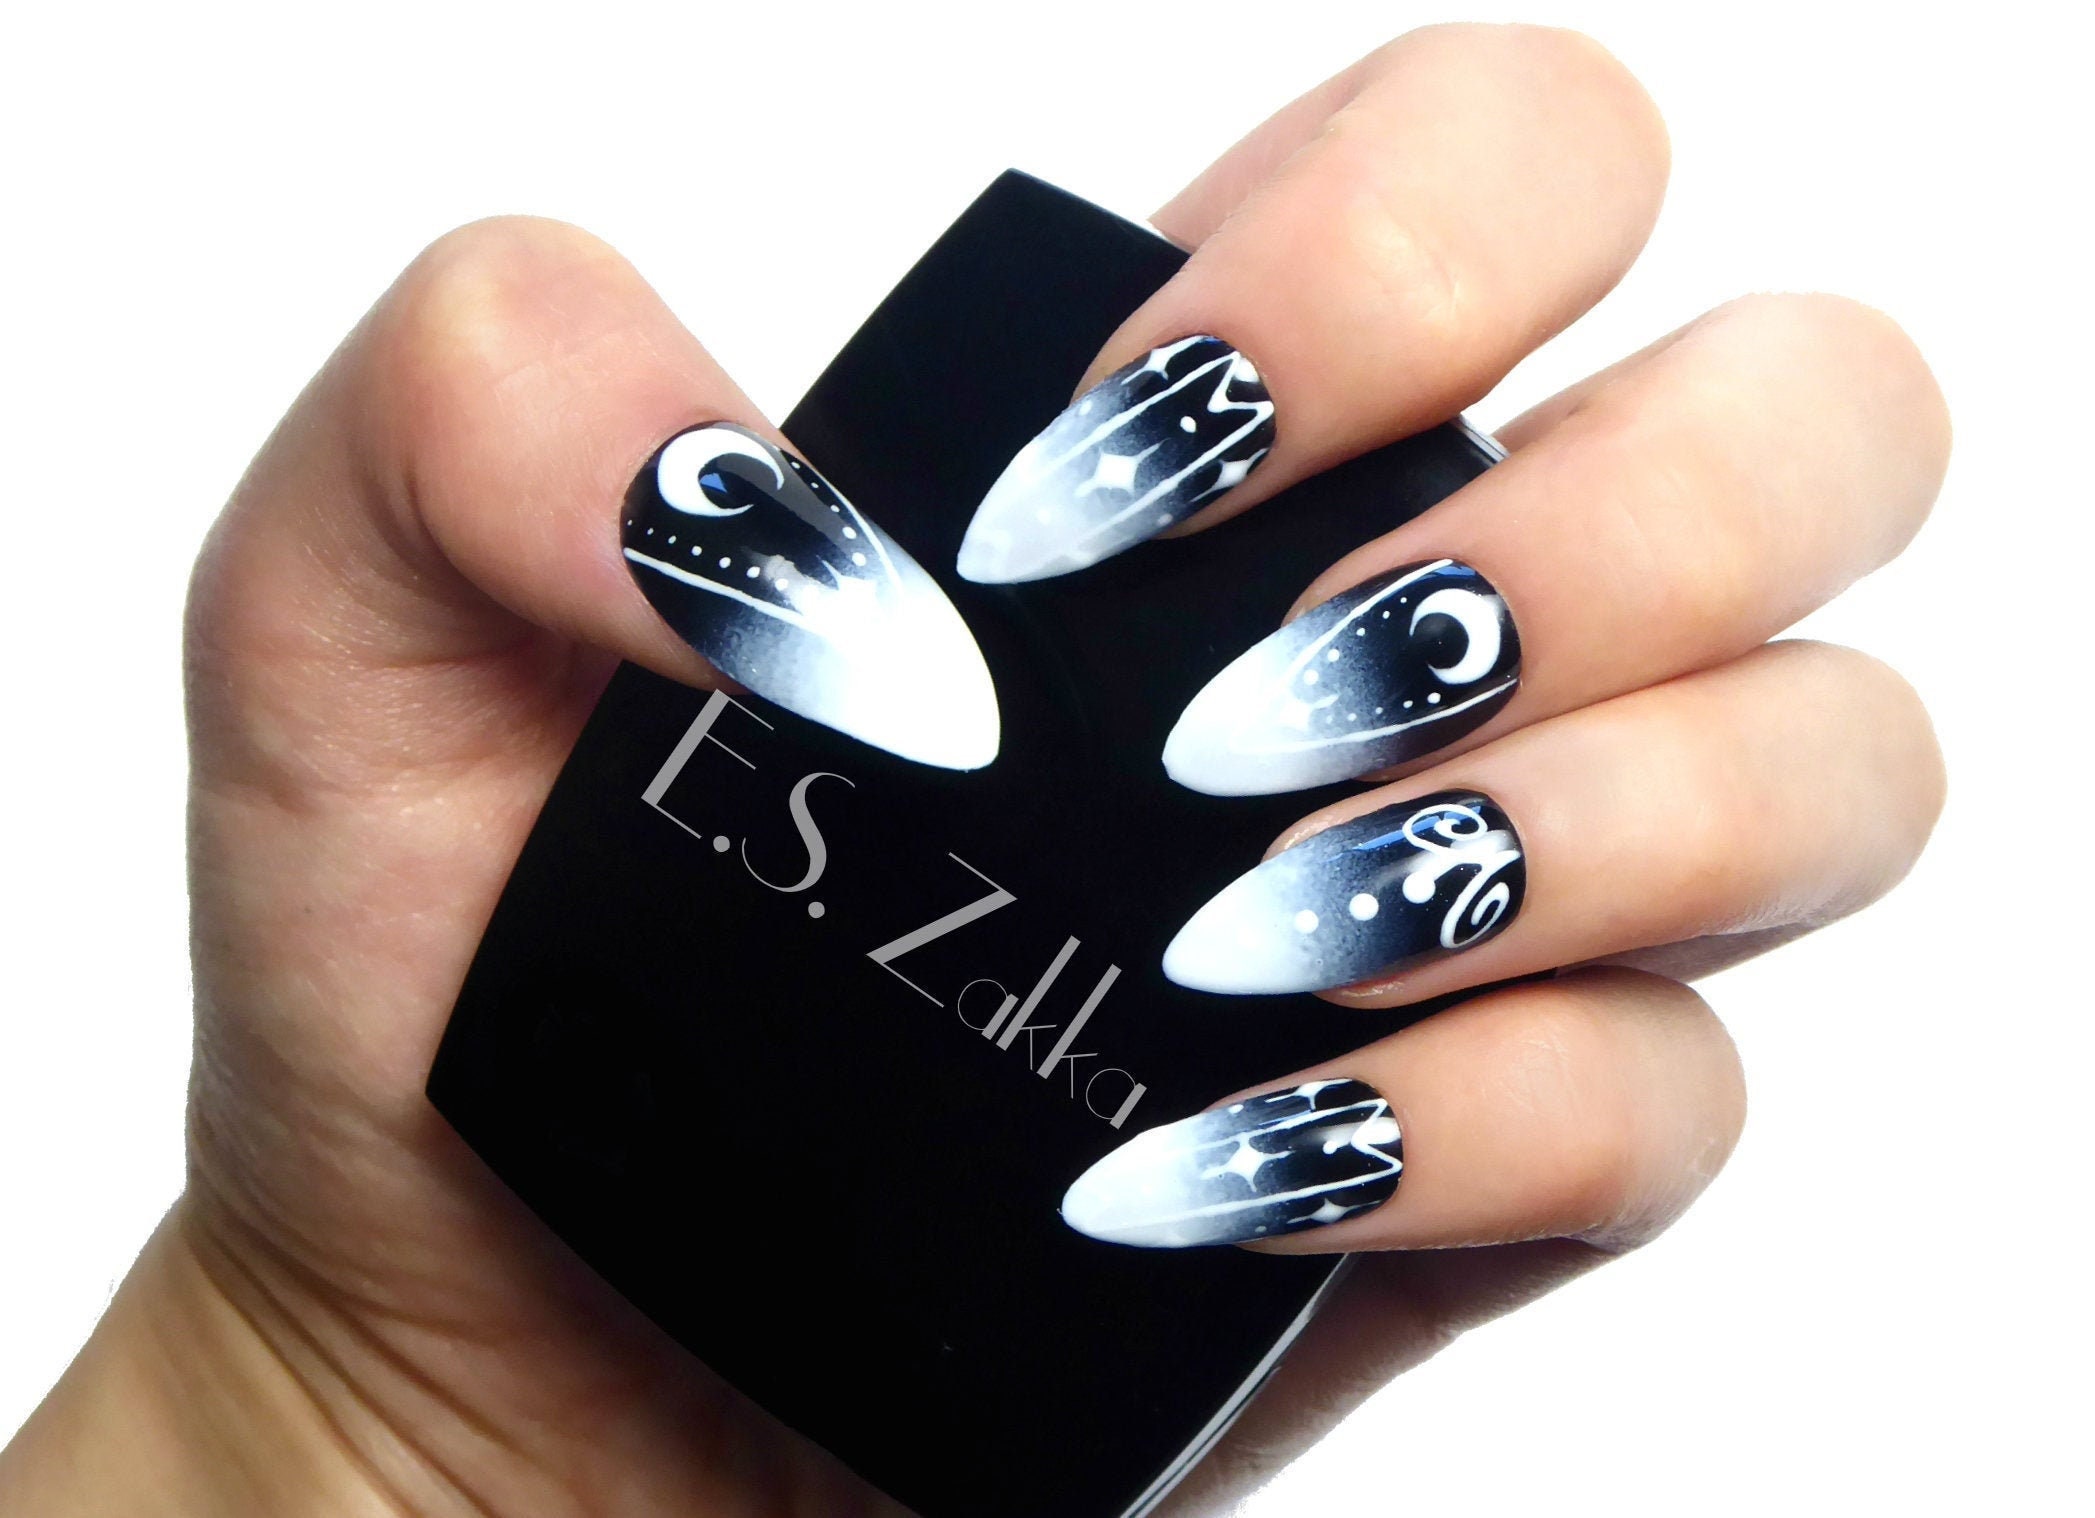 6. Wiccan Nail Art Trends - wide 10